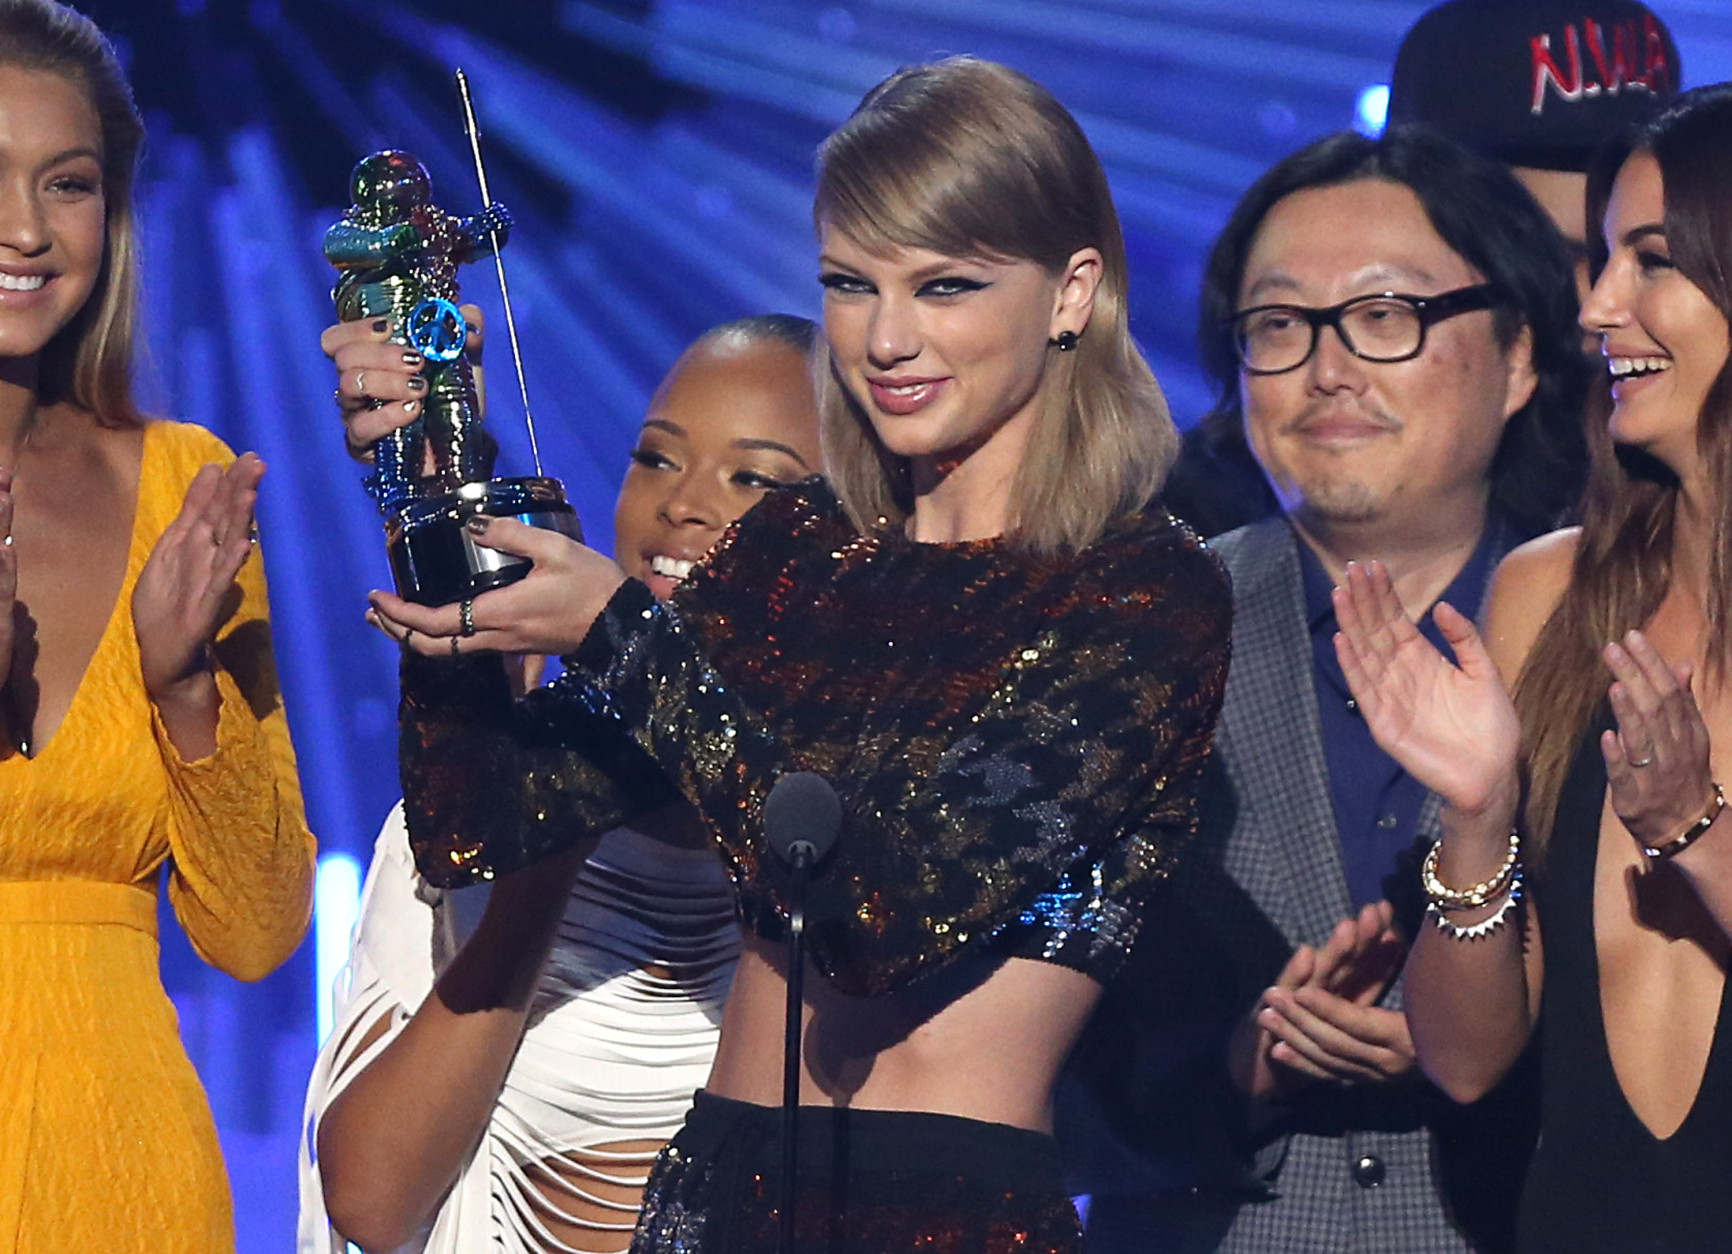 Taylor Swift accepts the award for video of the year for Bad Blood at the MTV Video Music Awards at the Microsoft Theater on Sunday, Aug. 30, 2015, in Los Angeles. Pictured from left is Gigi Hadid, Serayah, director Joseph Kahn and Lily Aldridge. (Photo by Matt Sayles/Invision/AP)